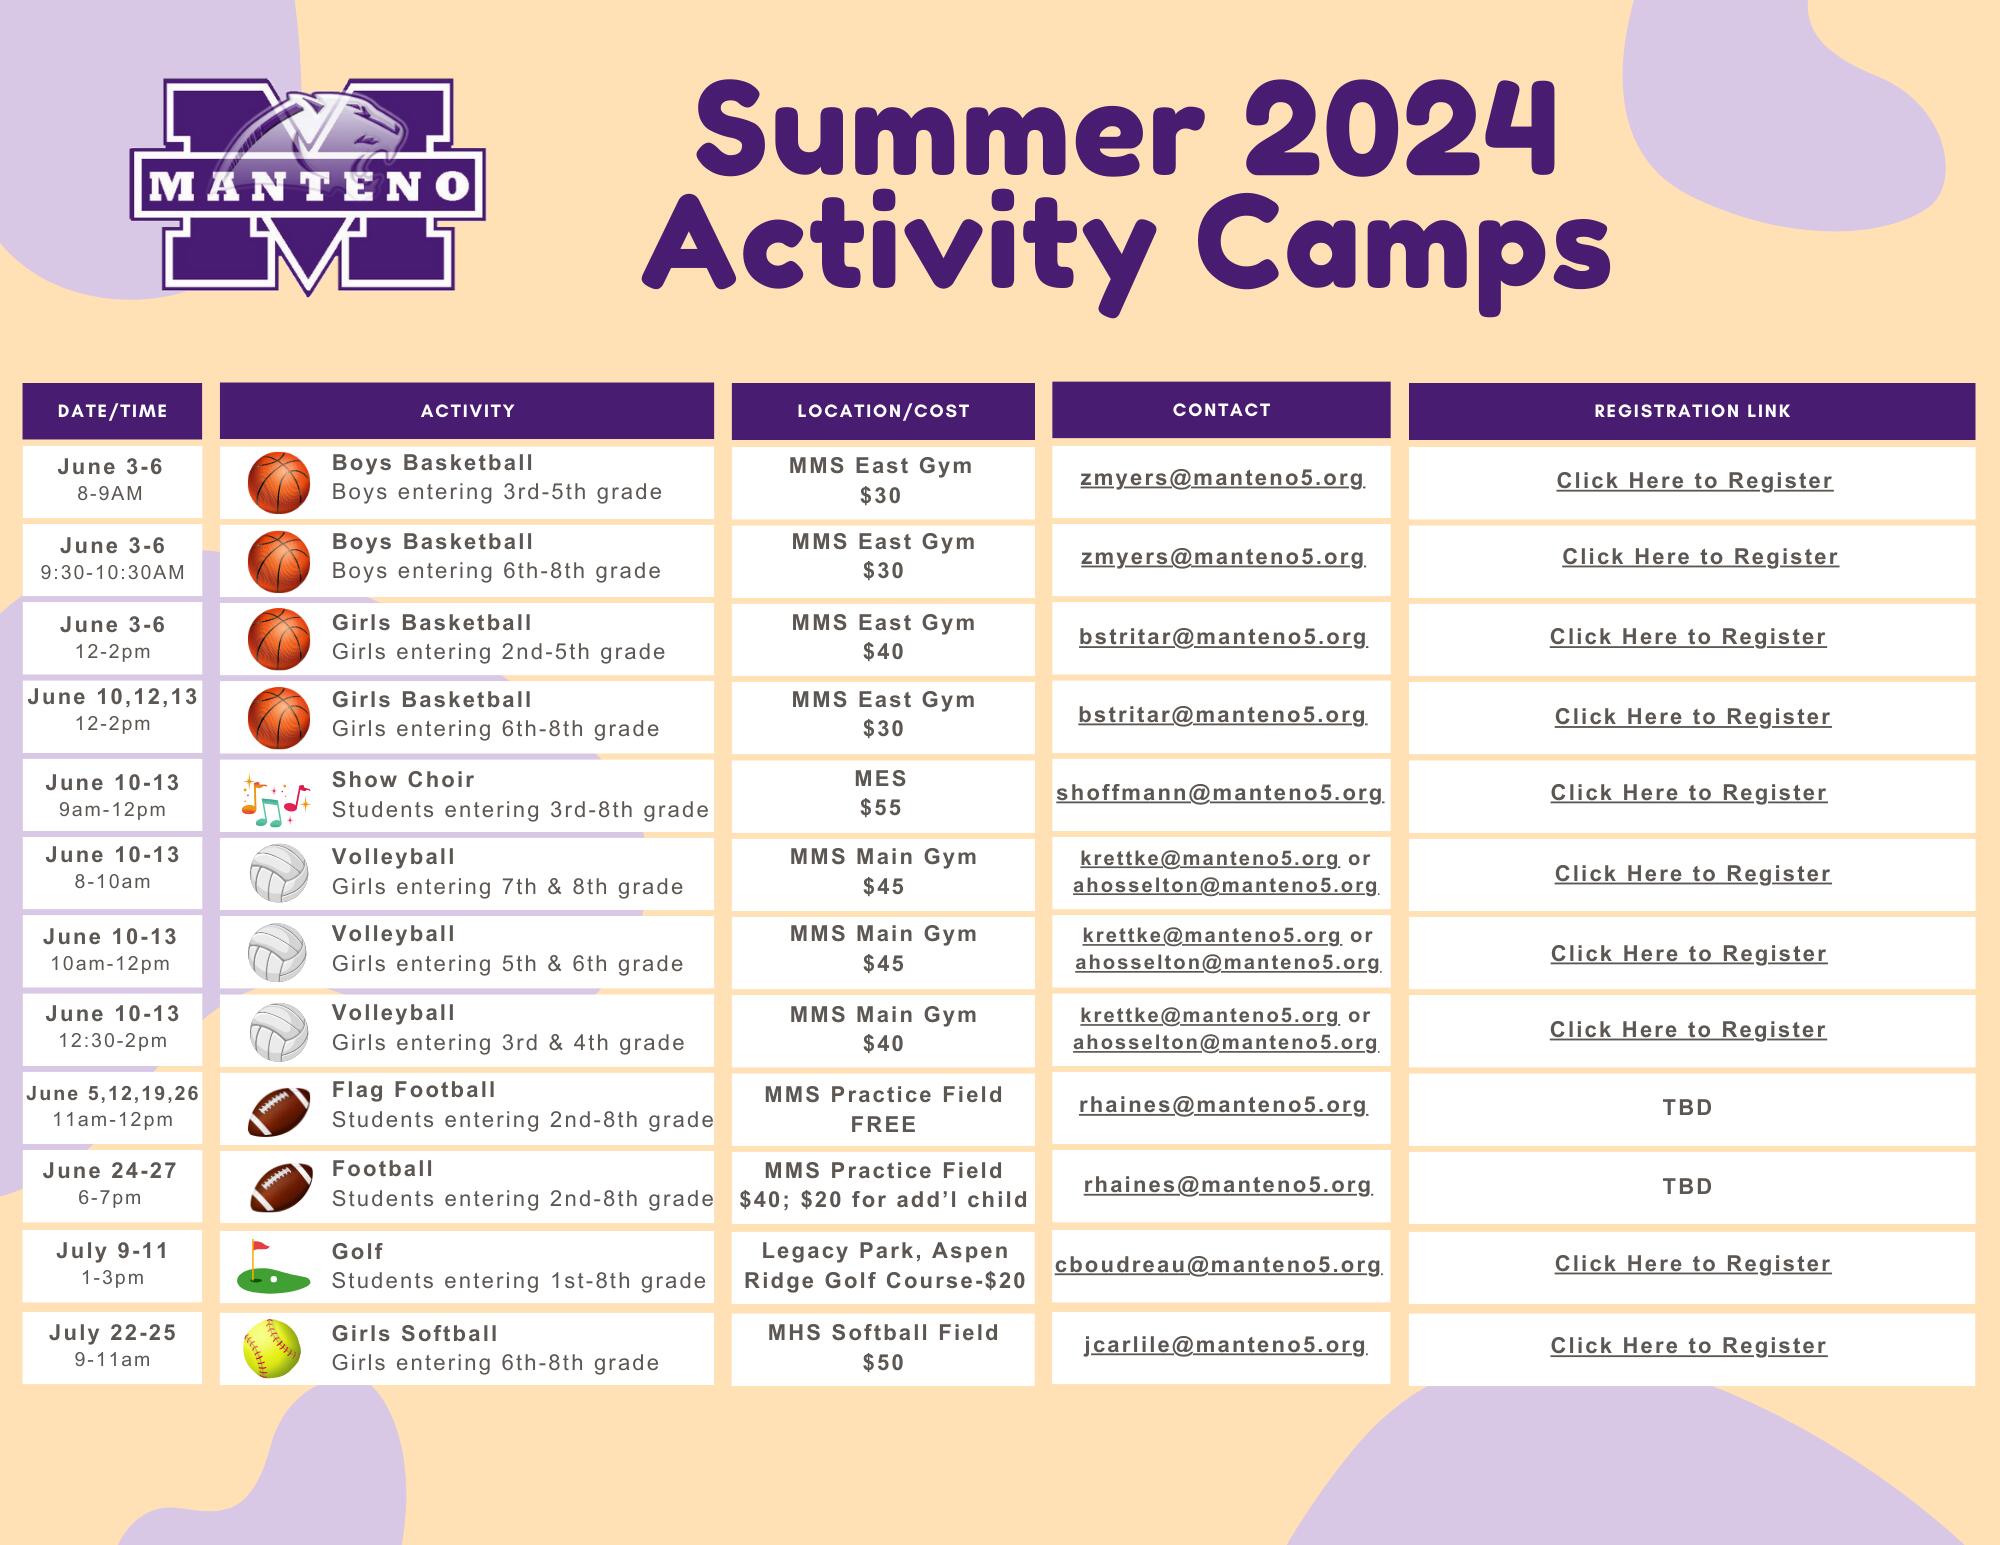 Summer 2024 Activity Camps